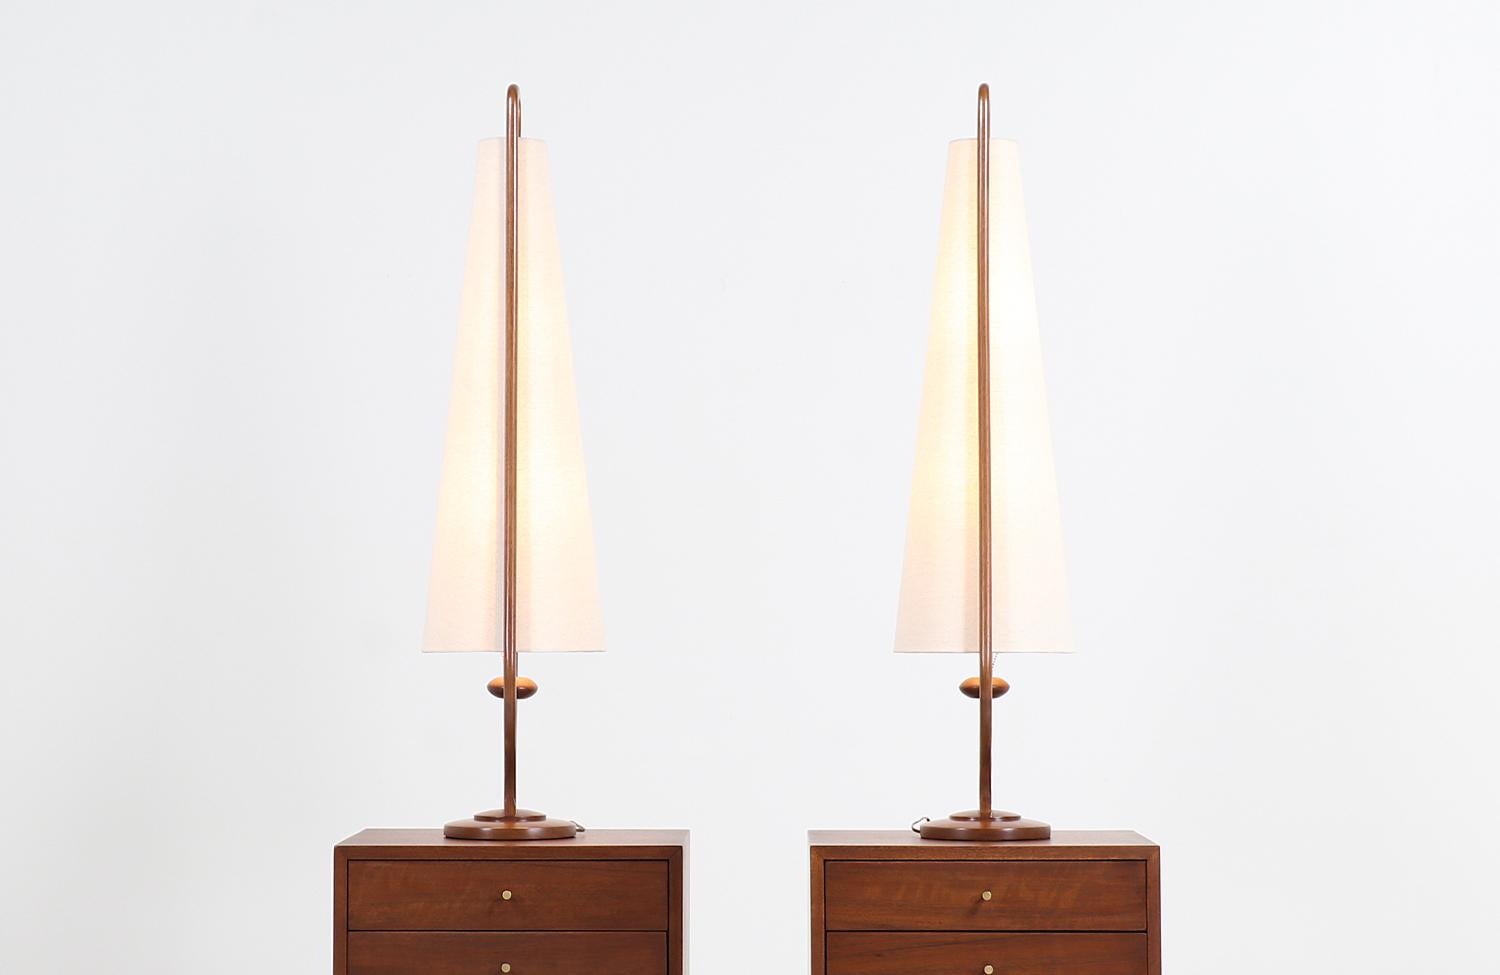 Polished Mid-Century Modern Sculpted Walnut and Brass Table Lamps by Modeline